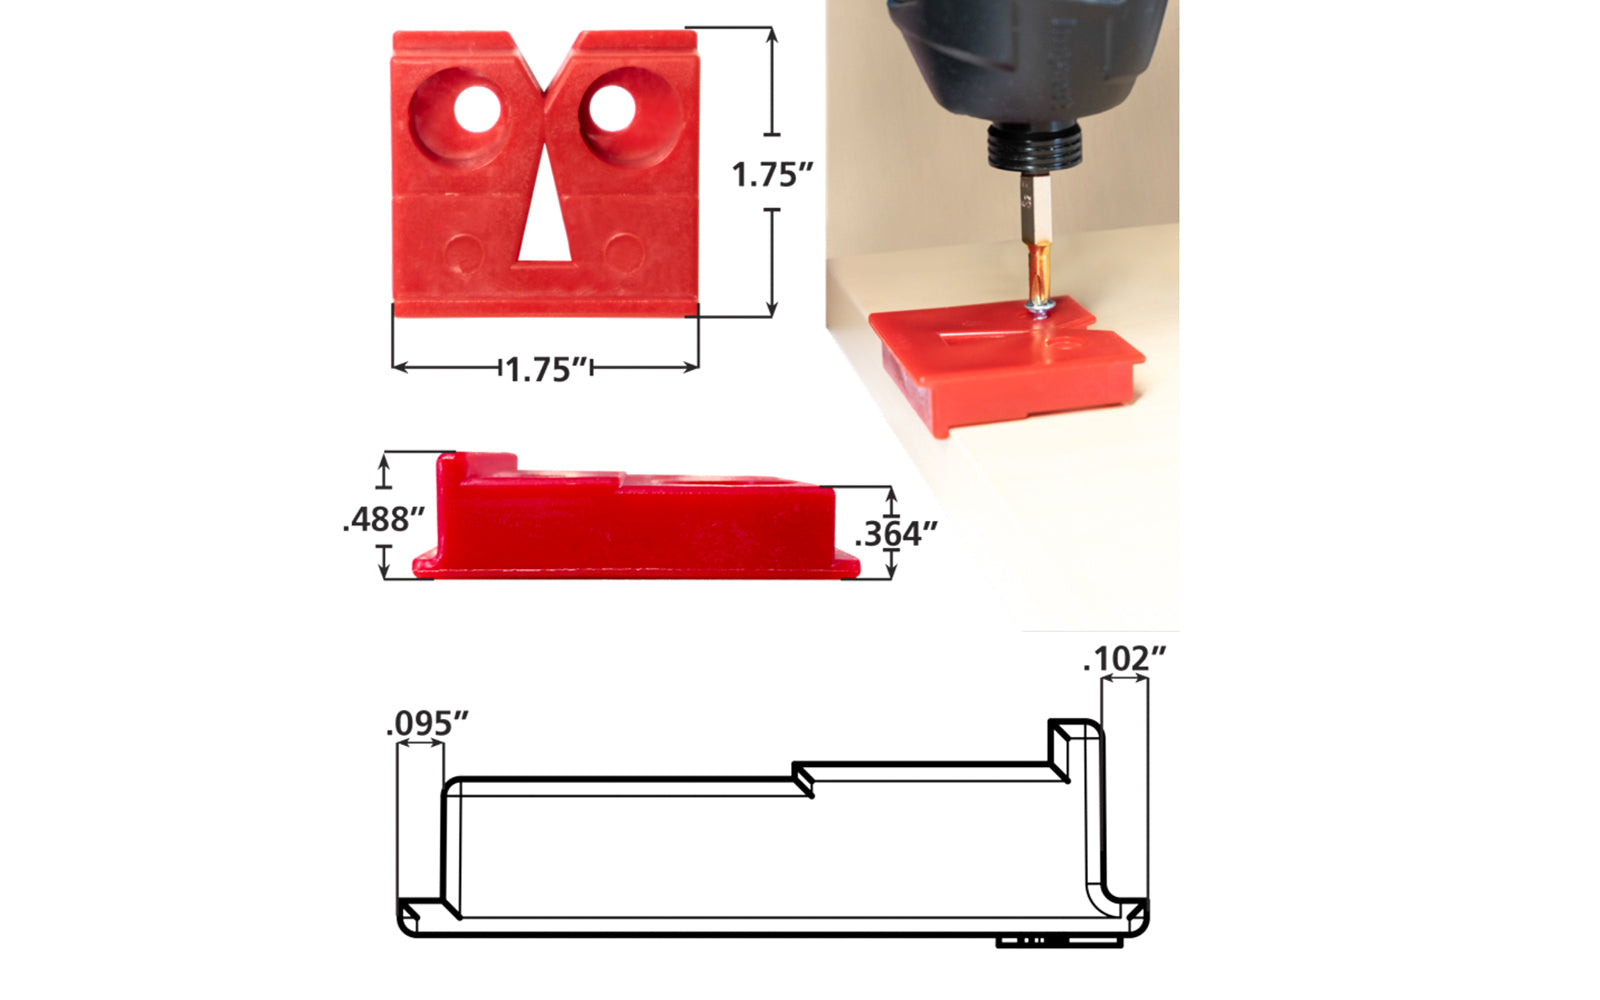 Euro Door Jig is a compact tool used for accurate & repeatable placement of FastCap's Euro Door Stops on cabinets - EURO DOOR STOP JIG